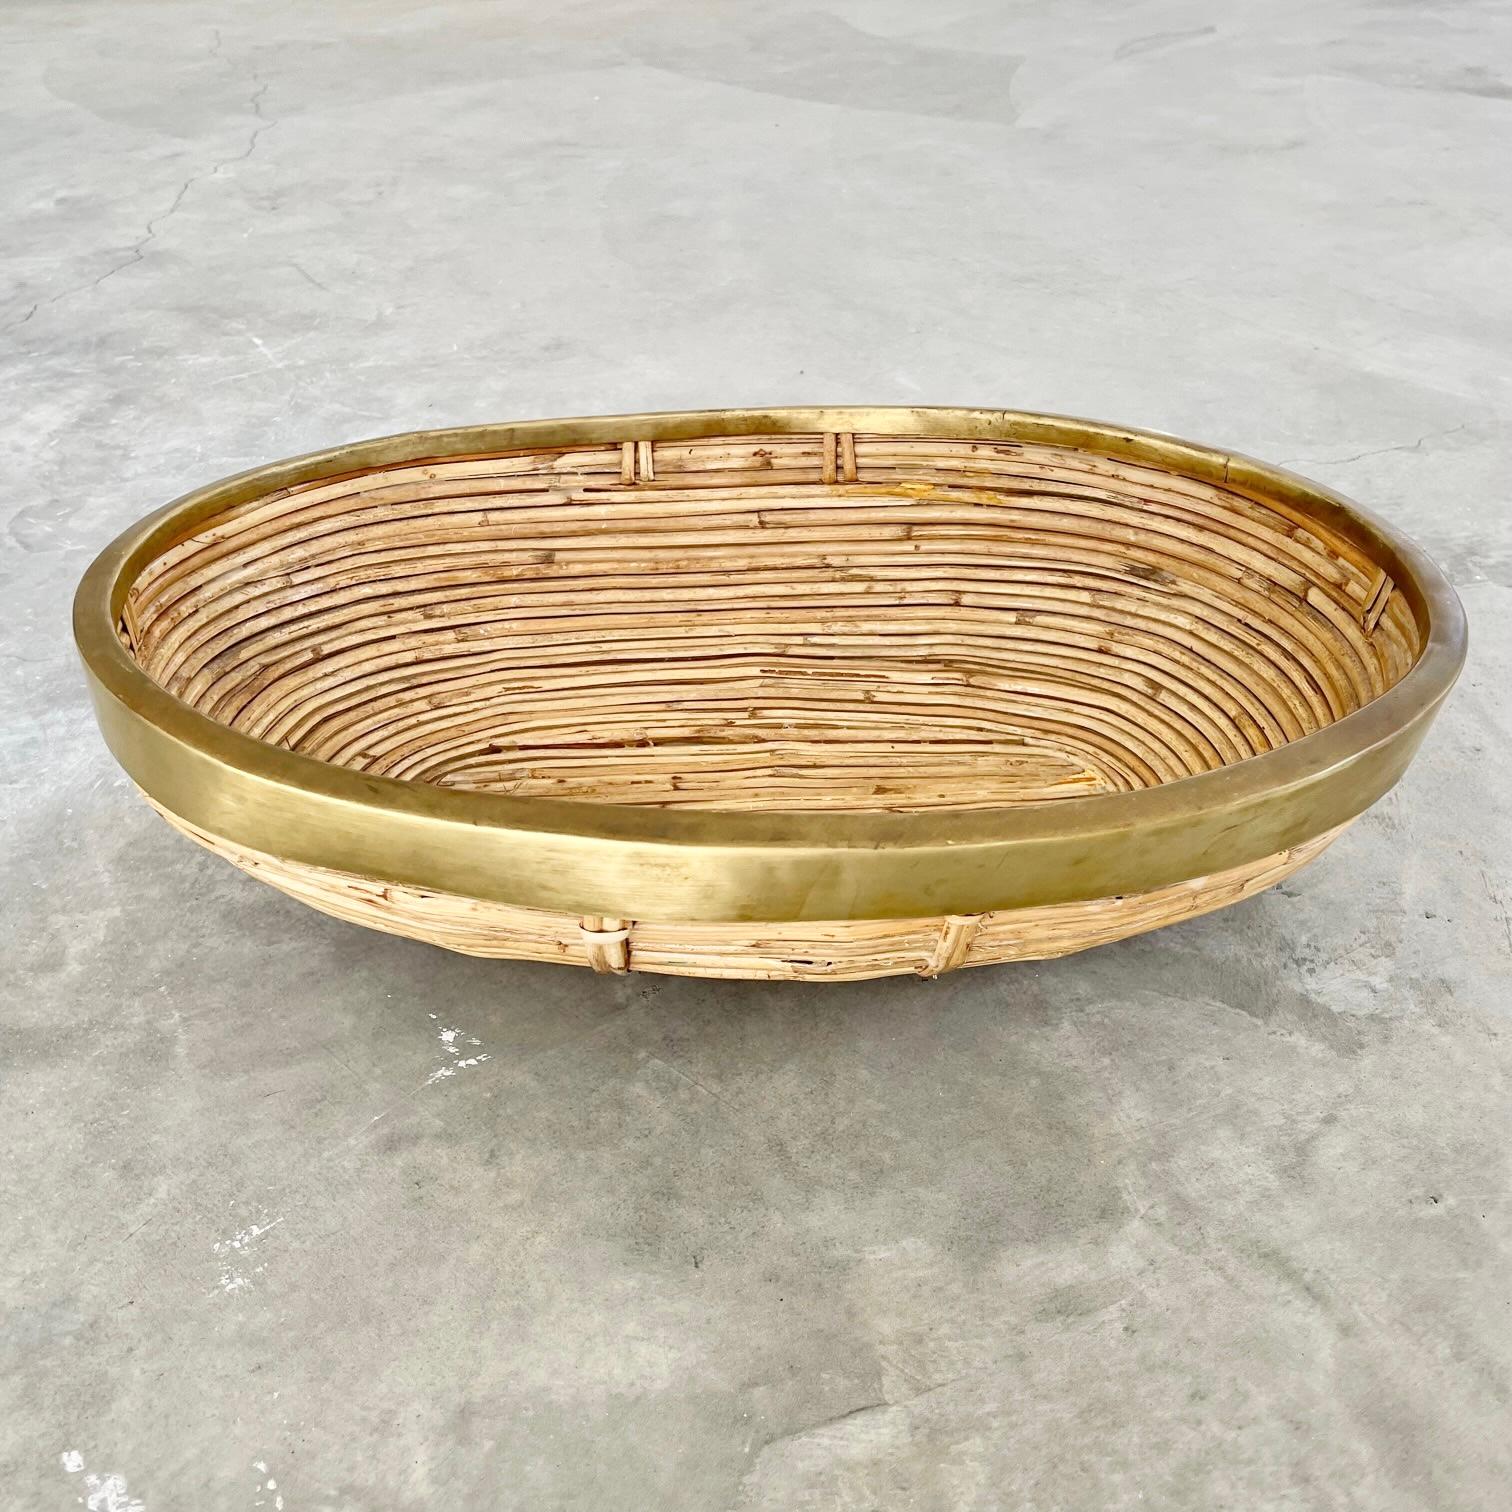 Elegant bamboo bowl with brass trim in the style of Crespi. Great texture. Bamboo pieces are woven together with wicker ties as well as glued together. Bowl is sturdy and is great to hold items as the base is supported by a rattan ring. Great piece